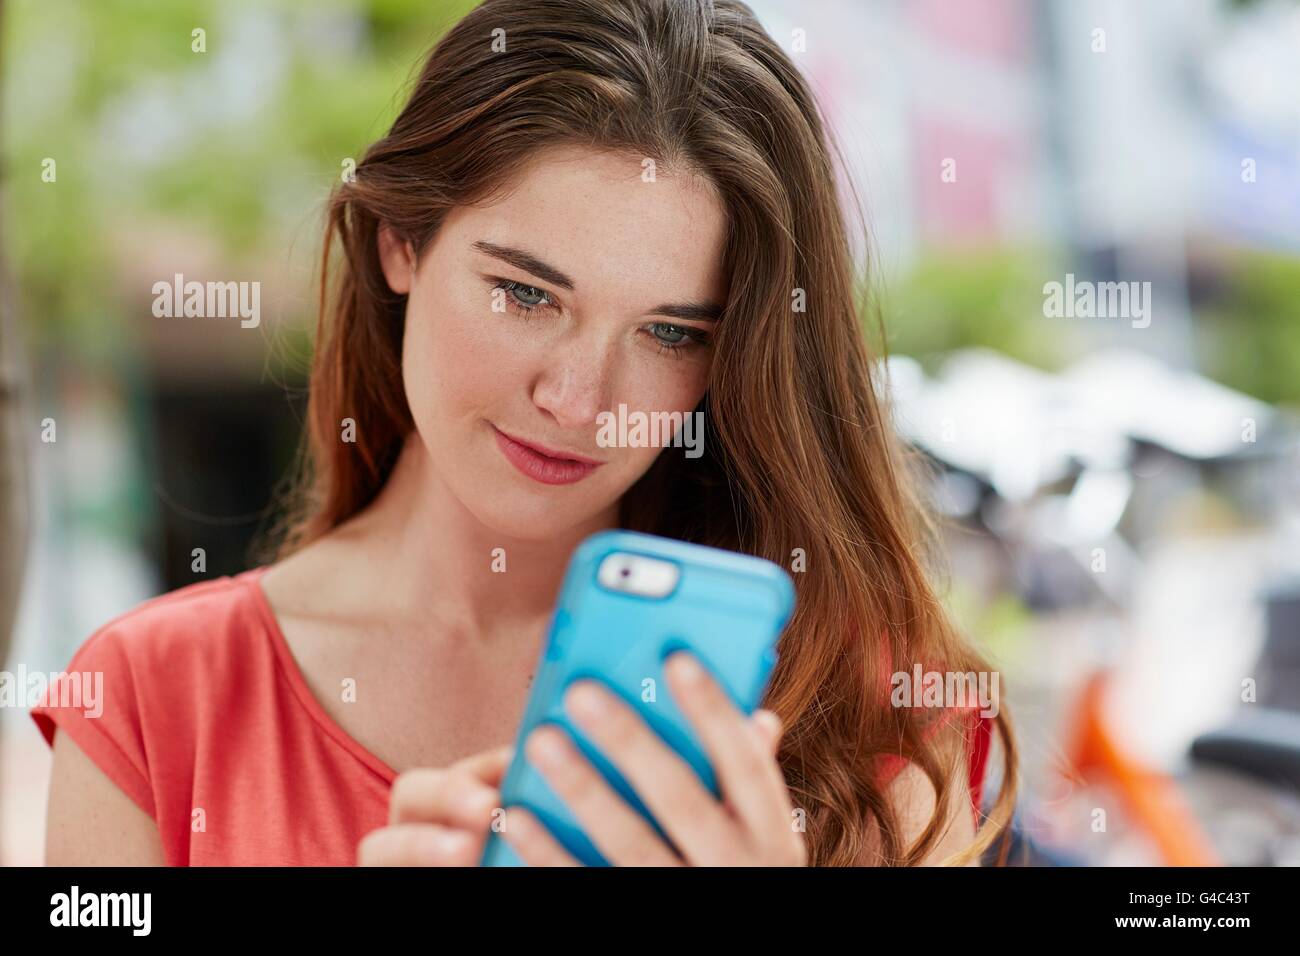 MODEL RELEASED. Young woman using smartphone. Stock Photo